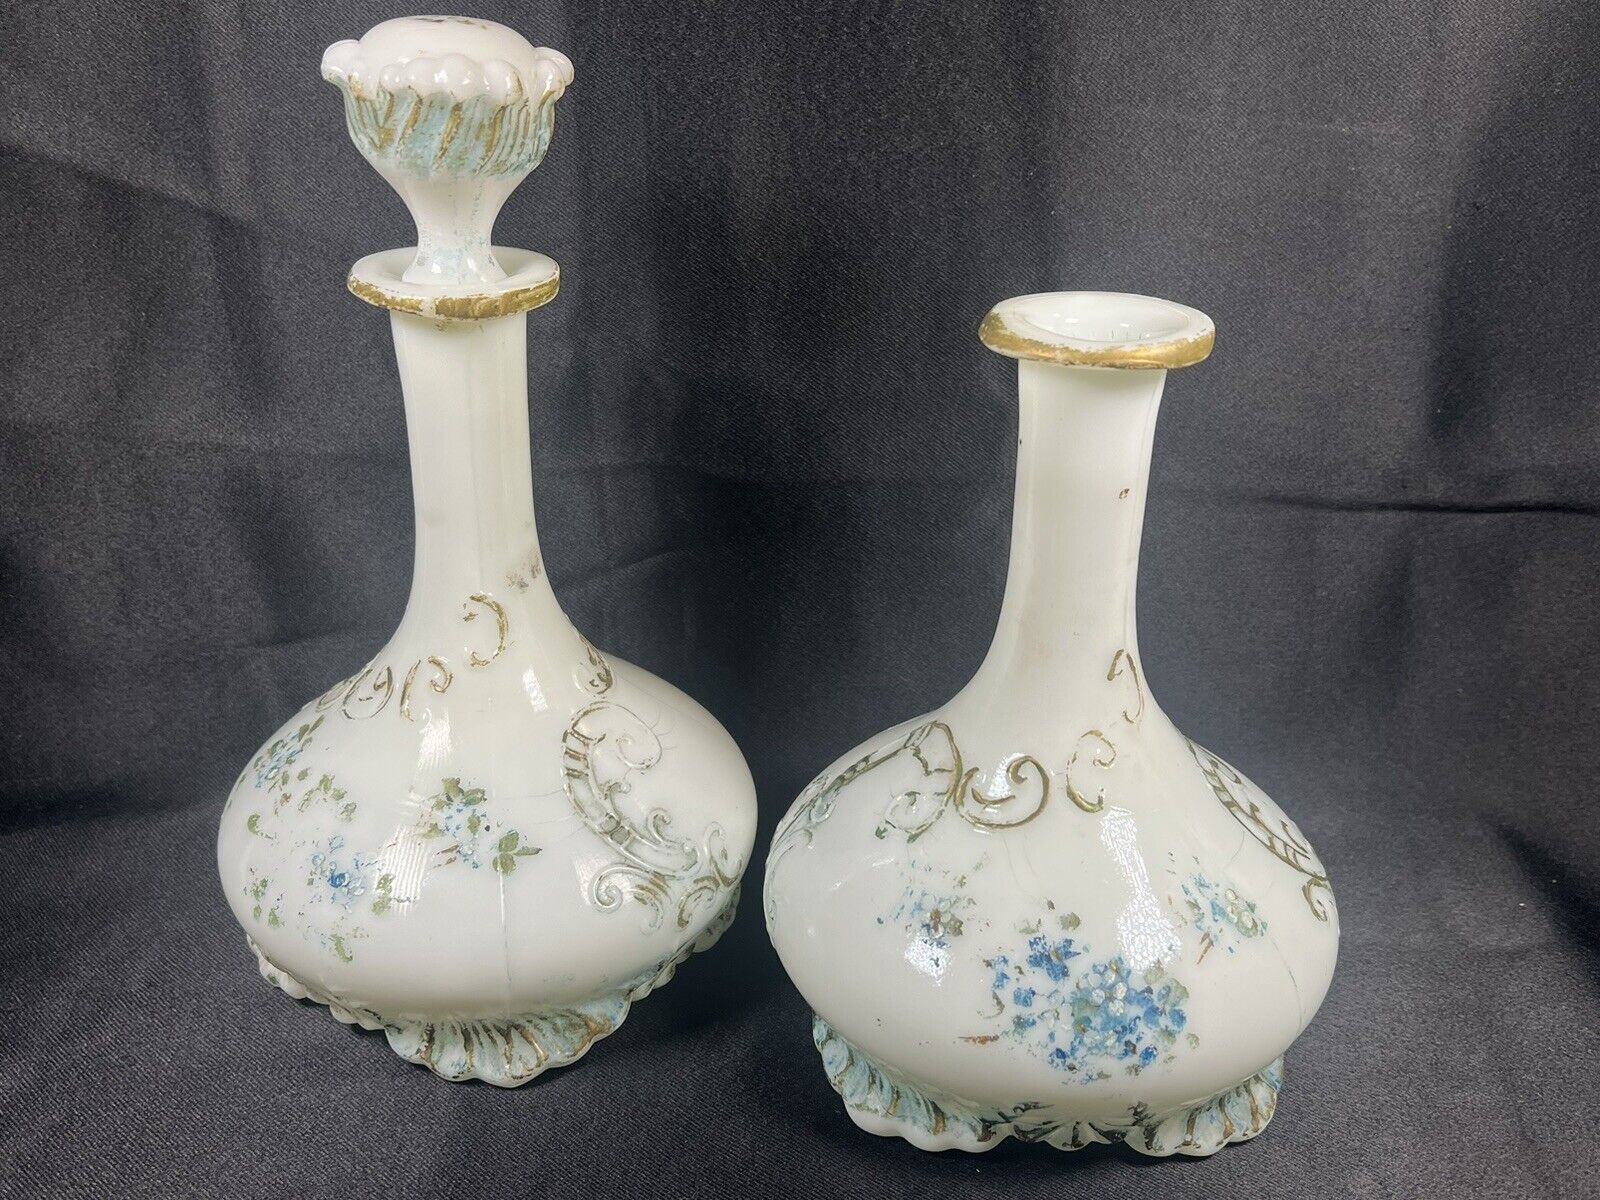 VTG ATQ SET 2 Victorian Hand Painted Milk Glass Decanters with 1 Stopper 8”